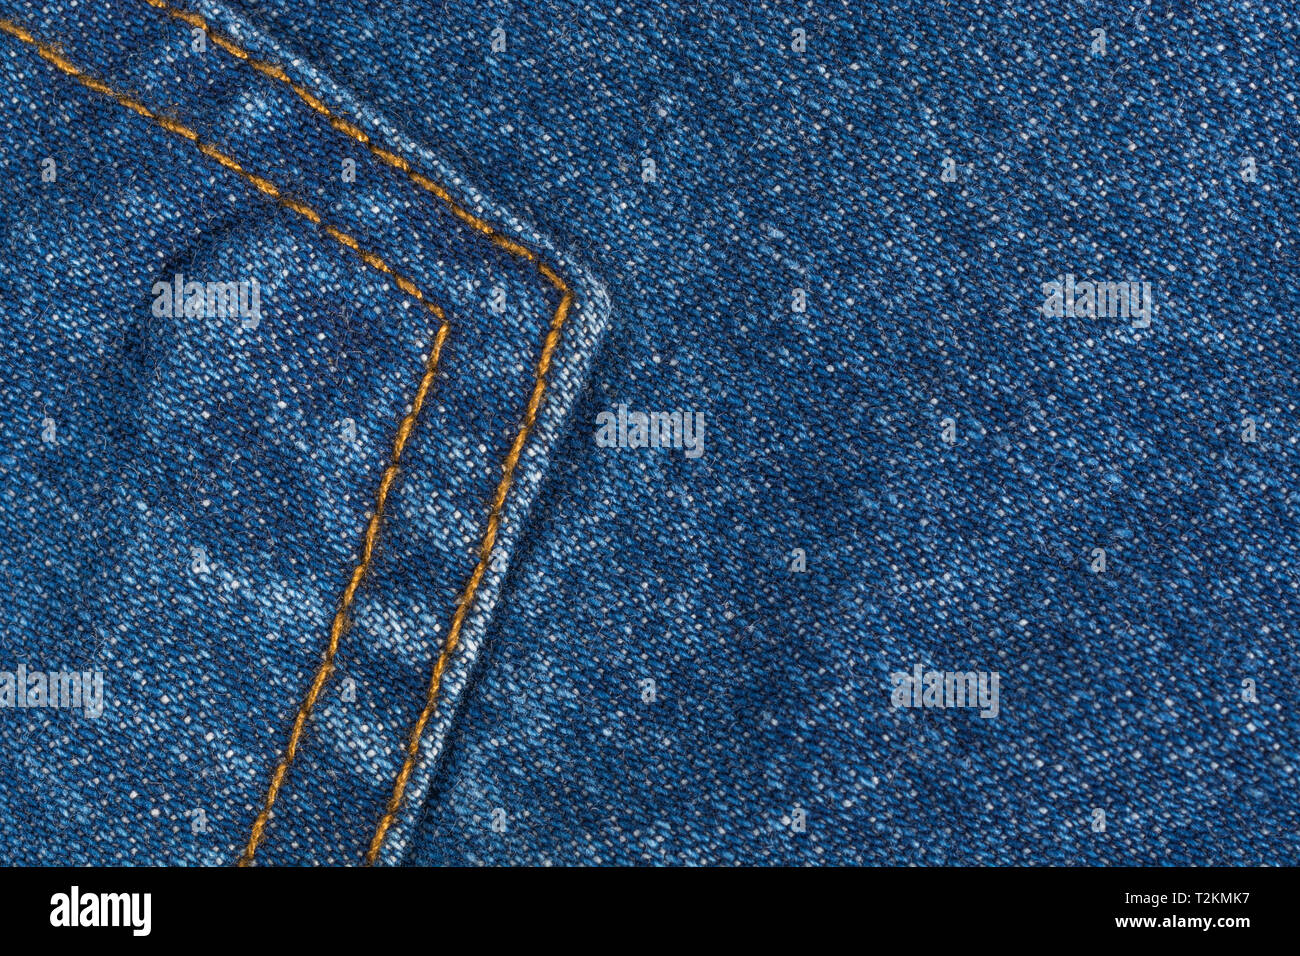 Close-up of blue denim fabric, showing warp and weft pattern thread pattern and orange stitching. Stitched line, line of stitches. Stock Photo